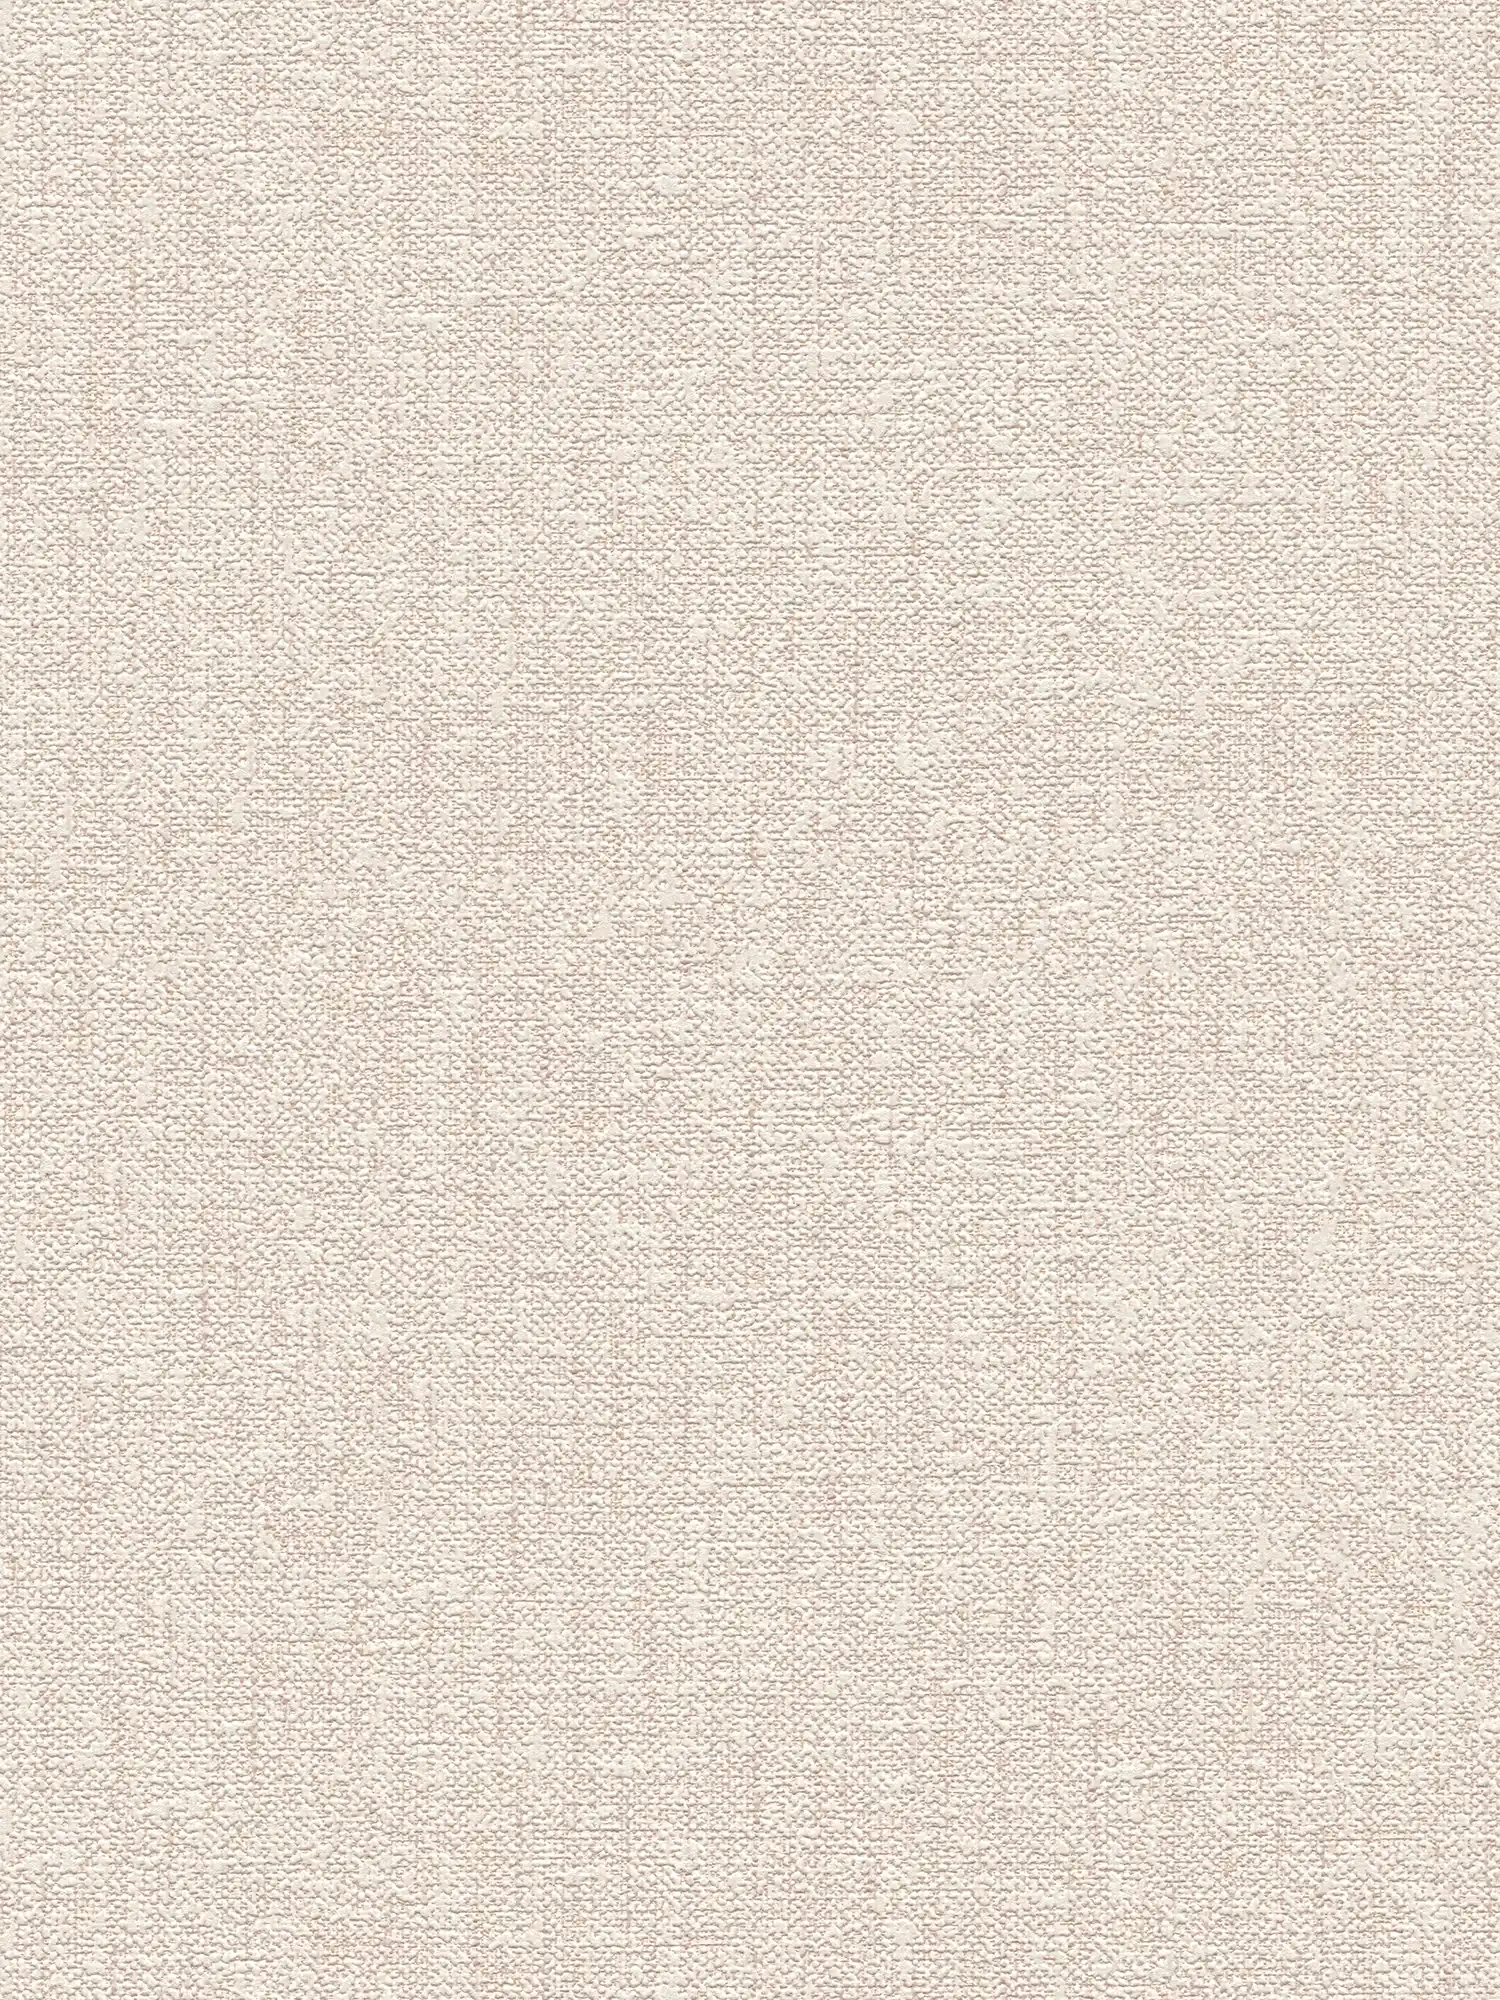 Wallpaper with textile structure in linen look - brown
